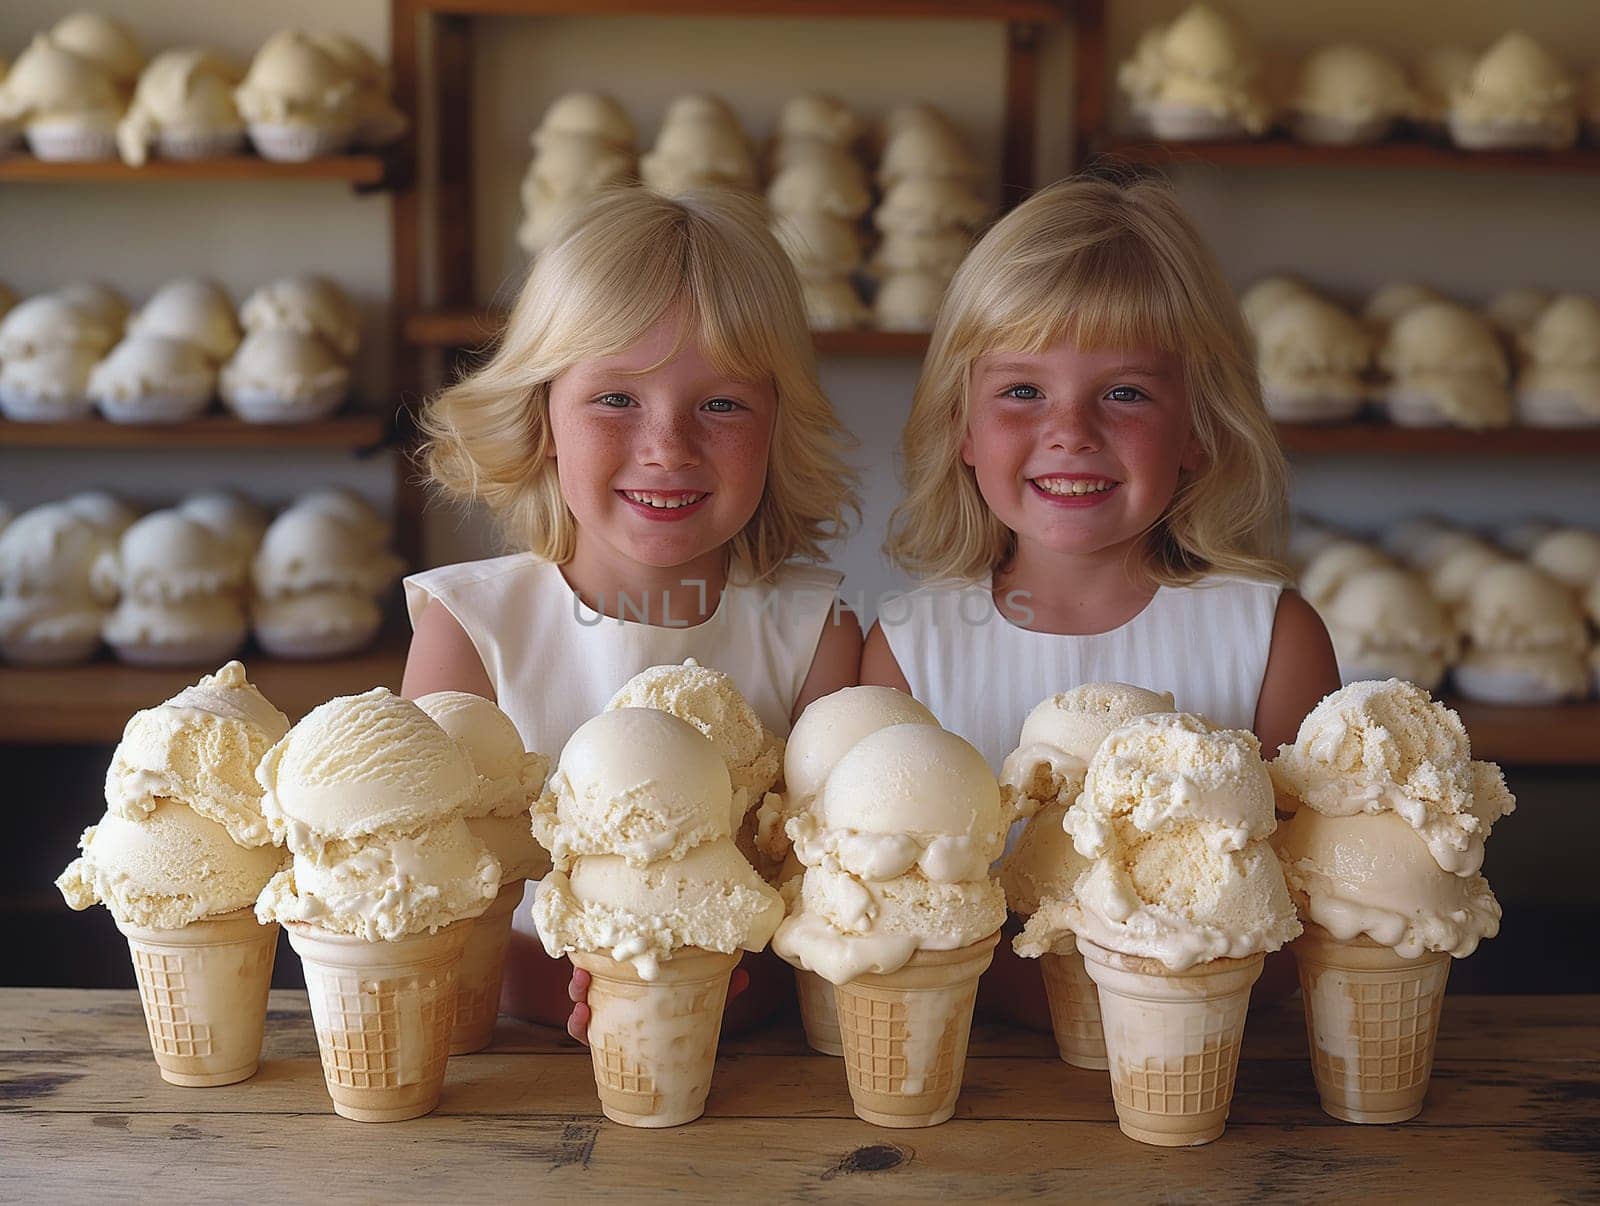 A single scoop of vanilla ice cream on a waffle cone with two children. Ice cream shop